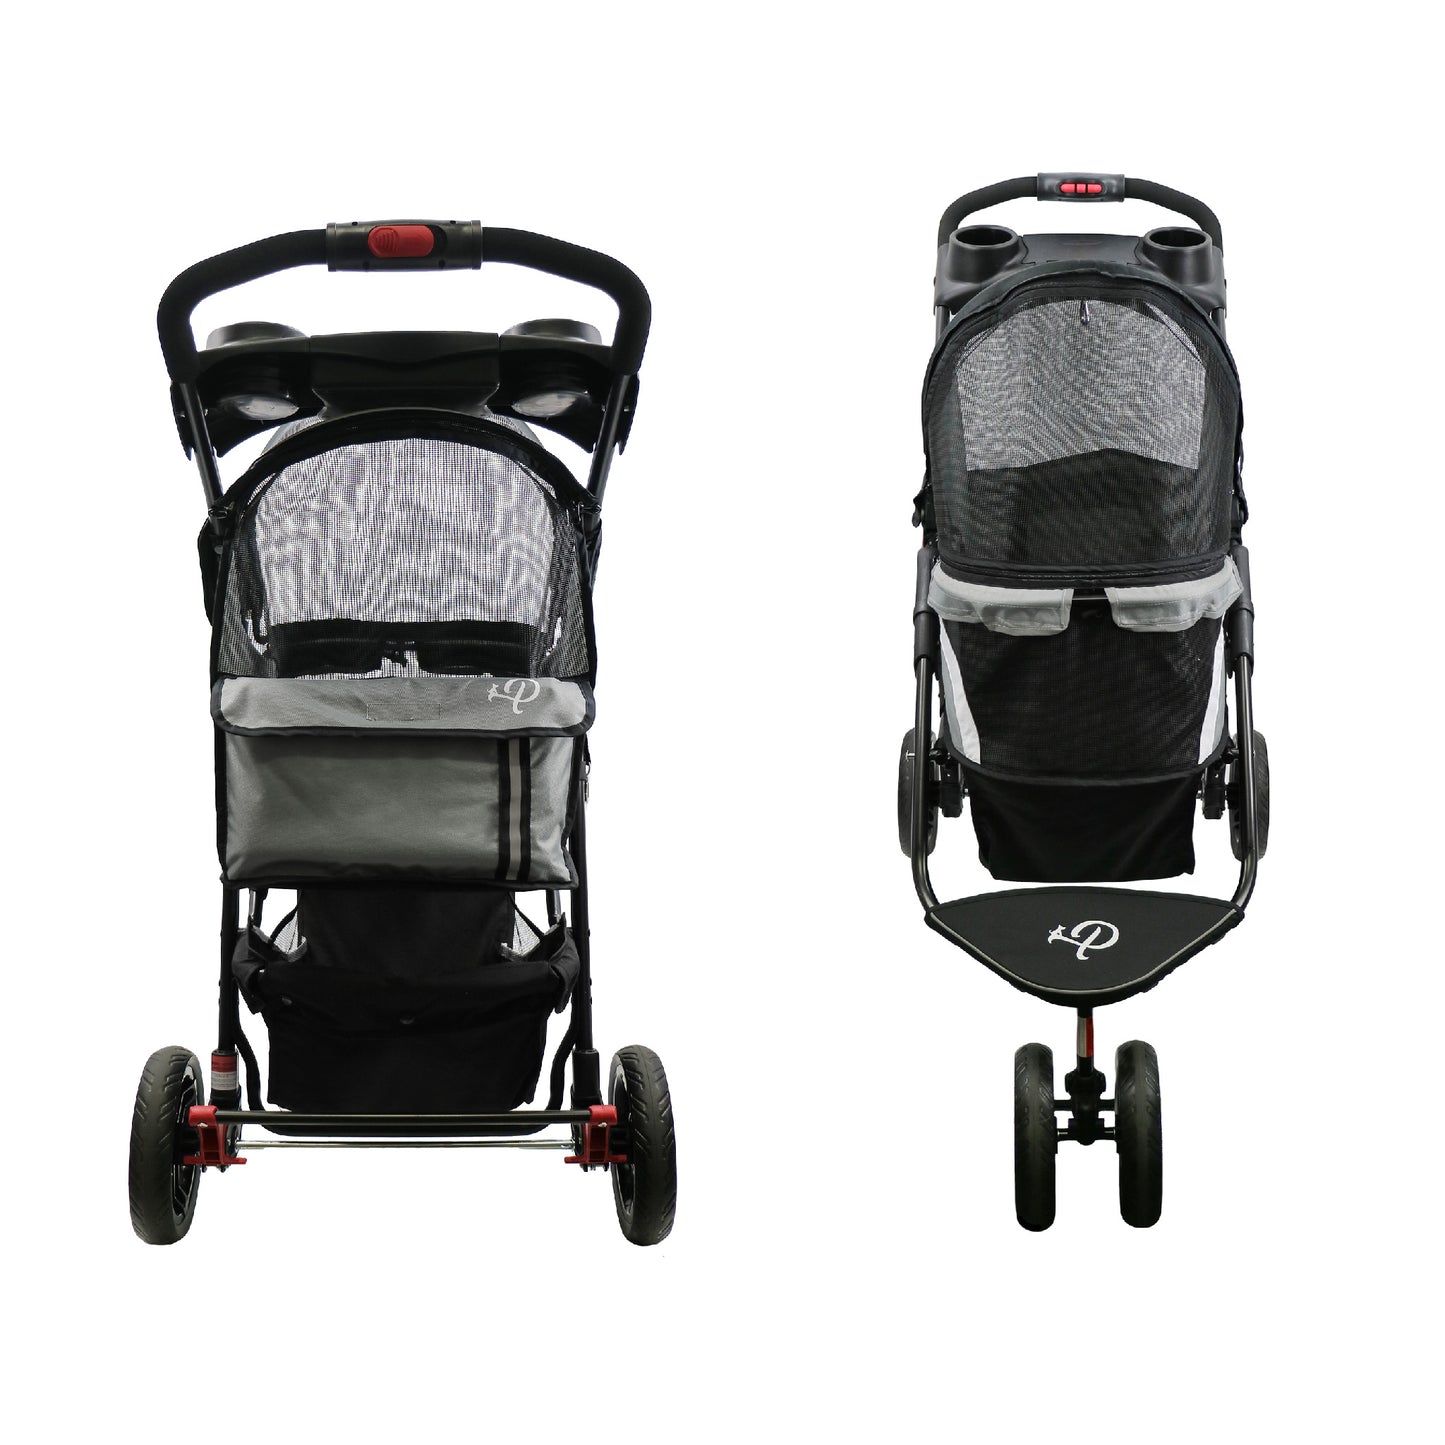 galaxy gray and black revolutionary pet stroller front and back